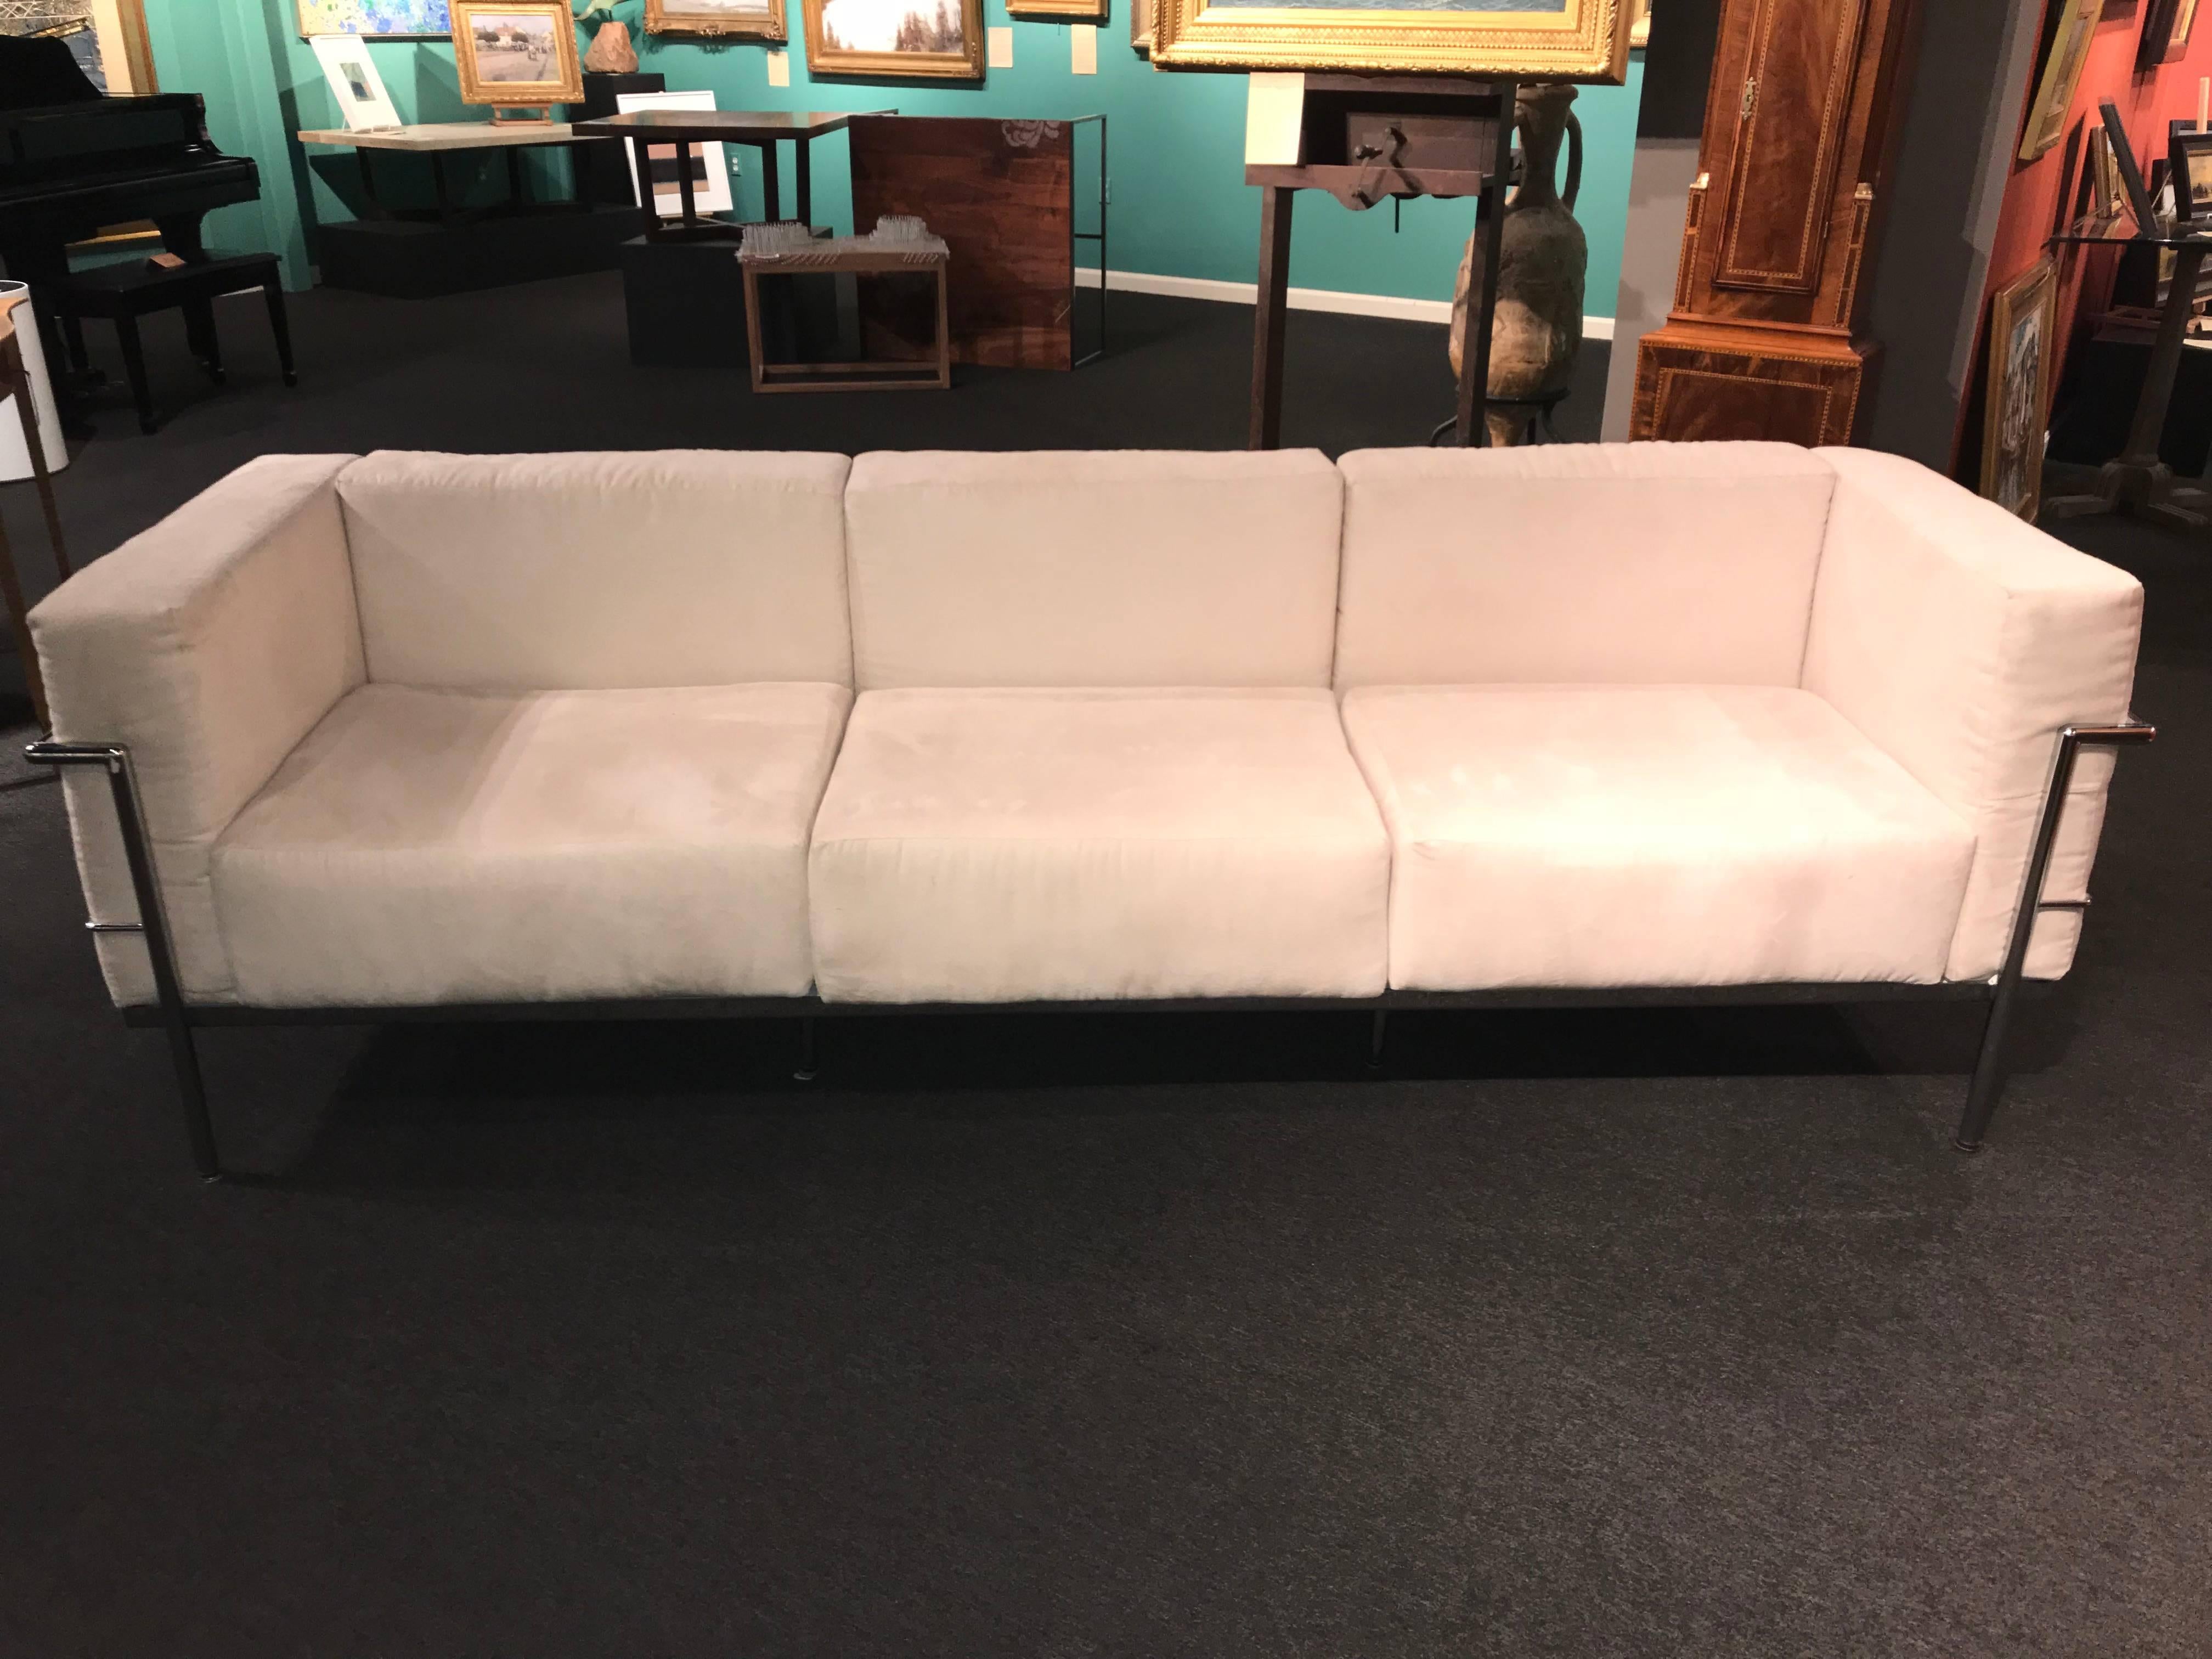 A fine modern triple-seat sofa in cream or off-white suede on an eight-leg highly polished chrome stainless steel frame, with woven canvas seat support and a lined under support panel. Swiss designer / architect Le Corbusier (Charles-Édouard